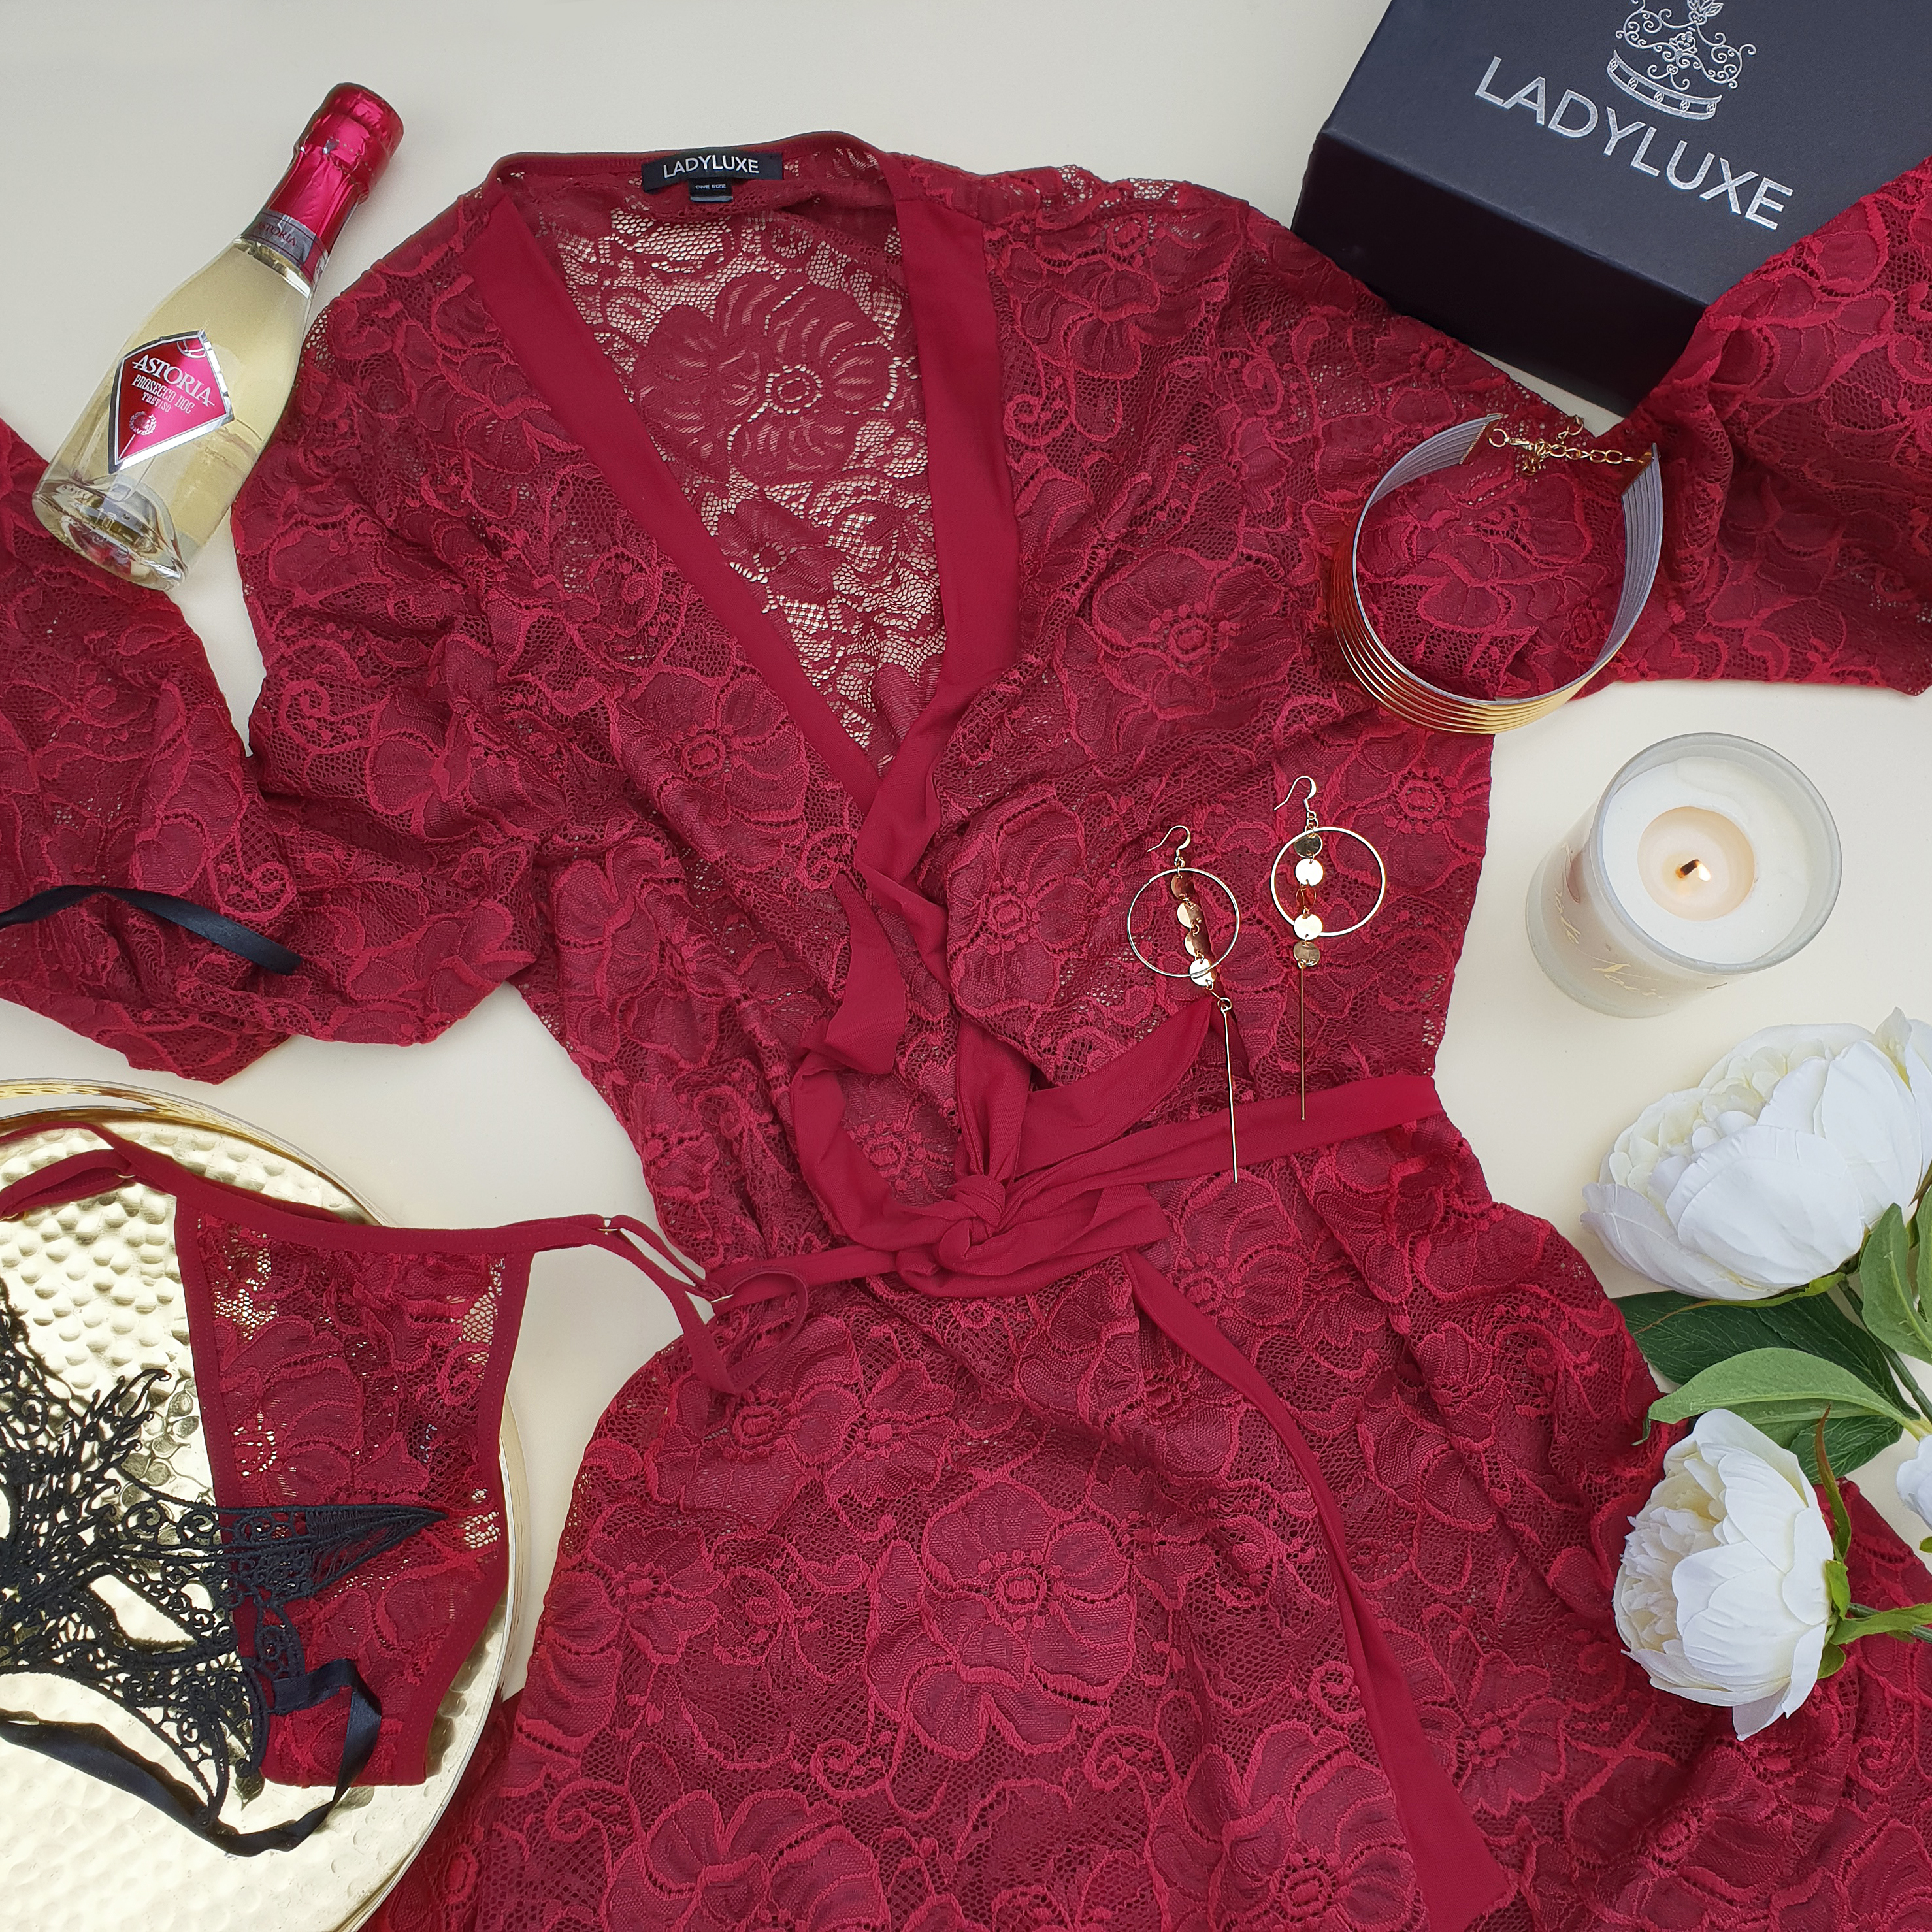 LADYLUXE | Laila Lace Robe and G-String Set